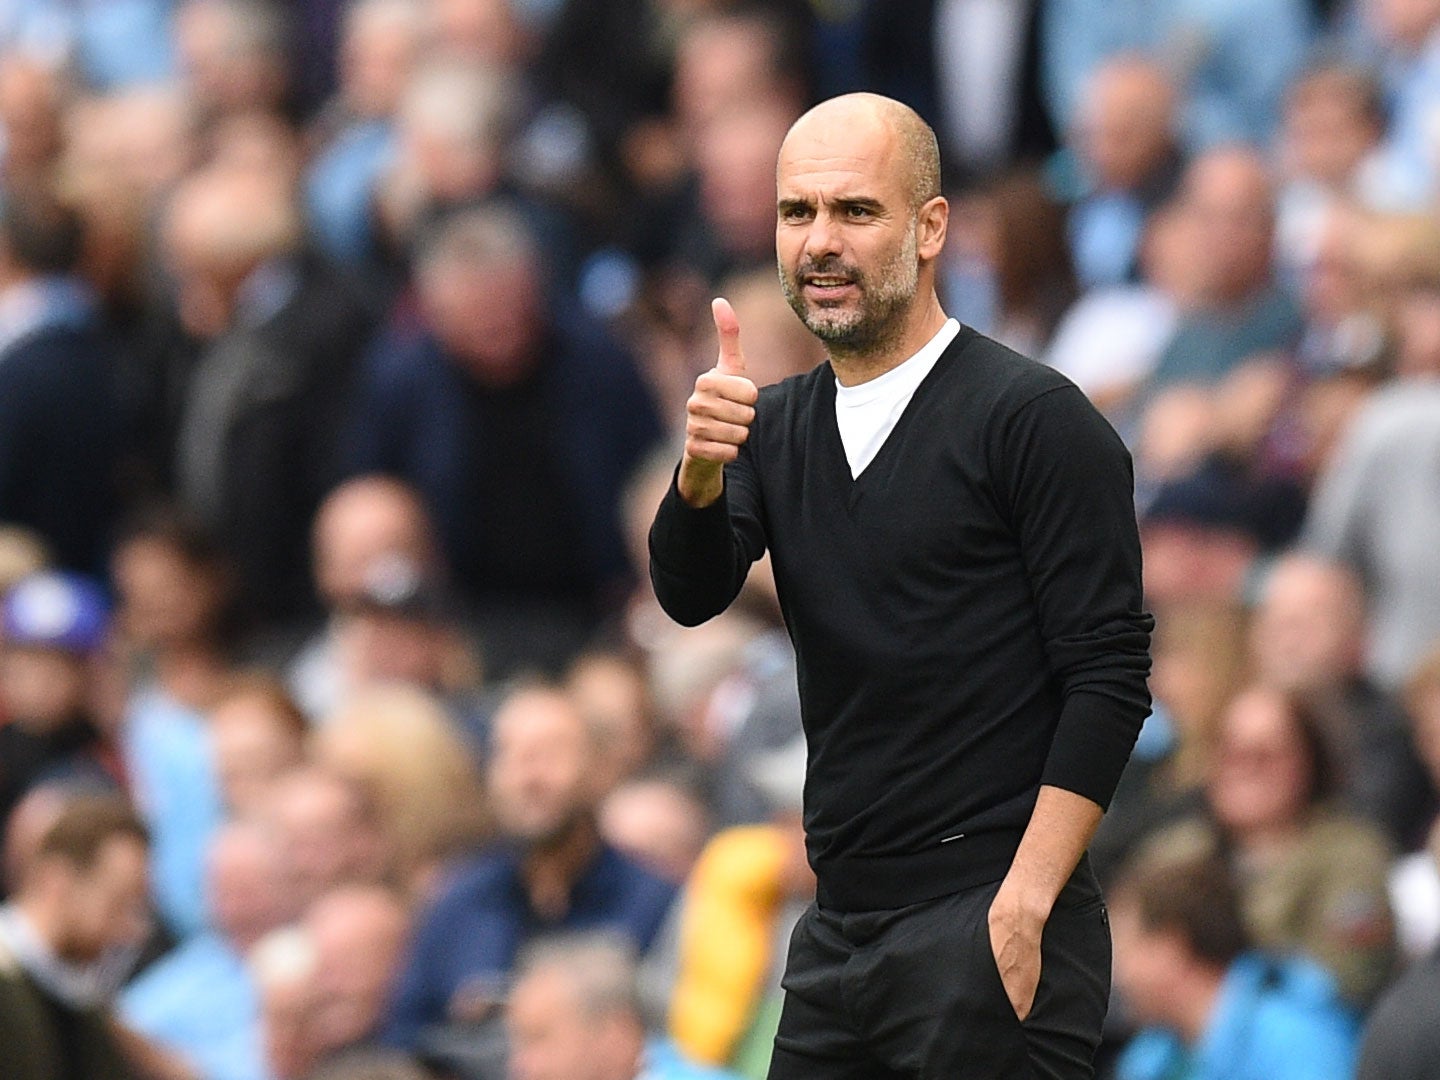 Pep Guardiola's side have scored five or more goals in three straight league games